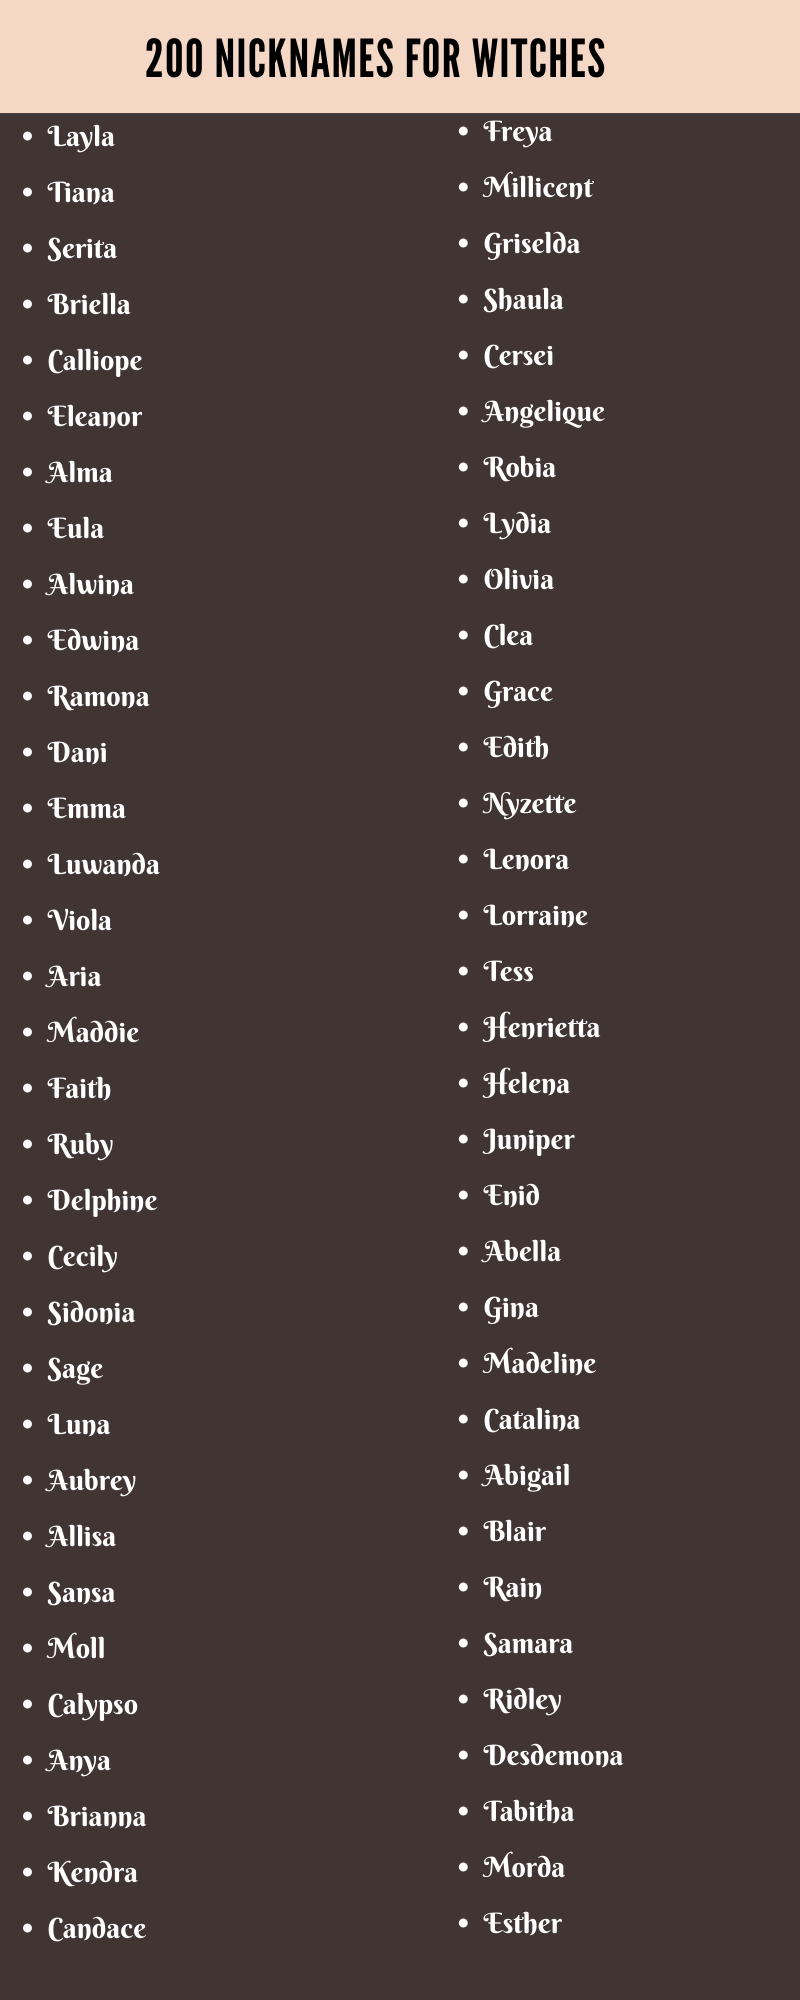 Nicknames For Witches